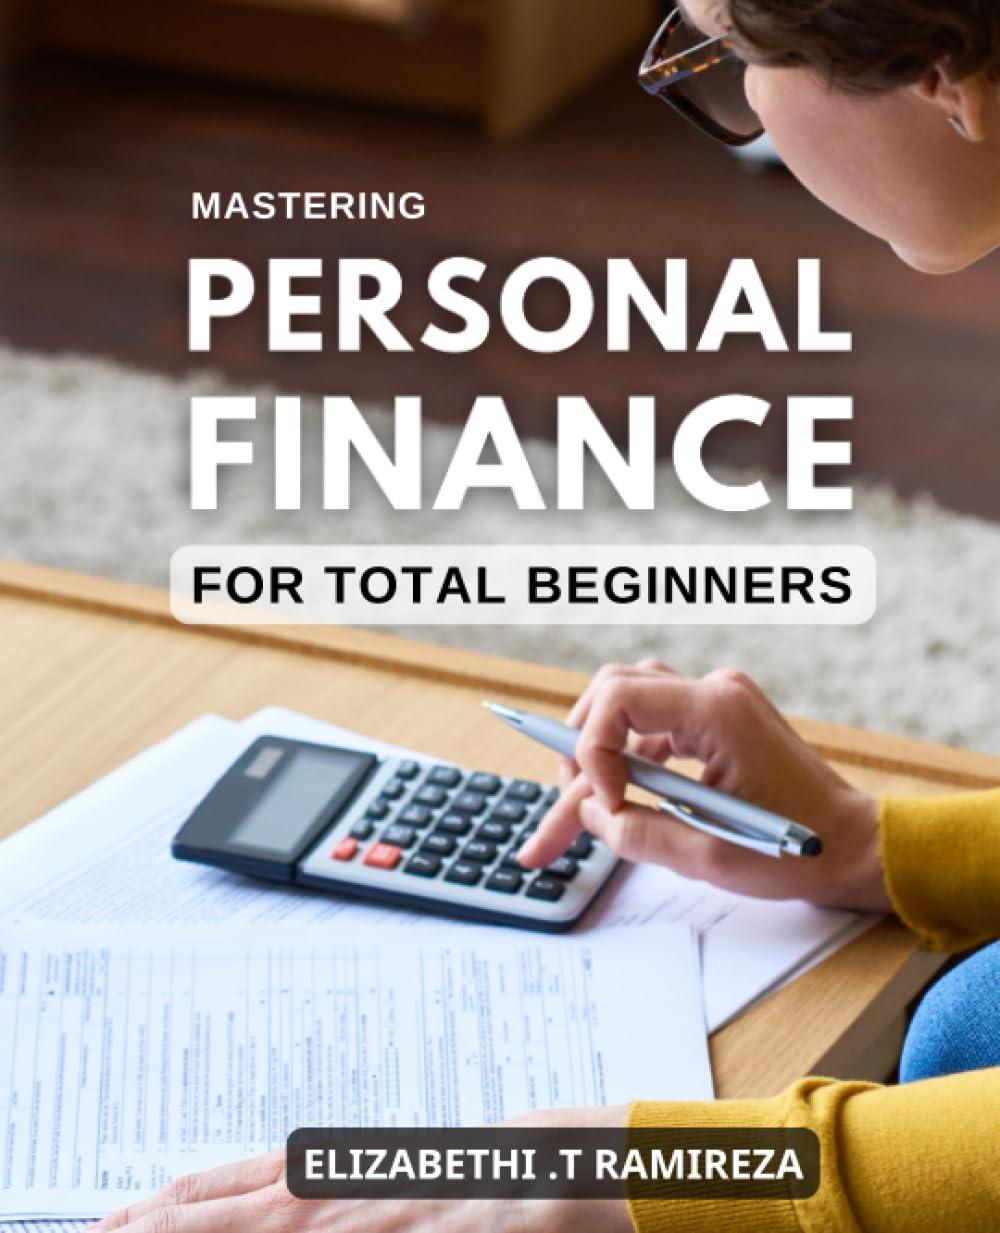 Mastering Personal Finance For Total Beginners